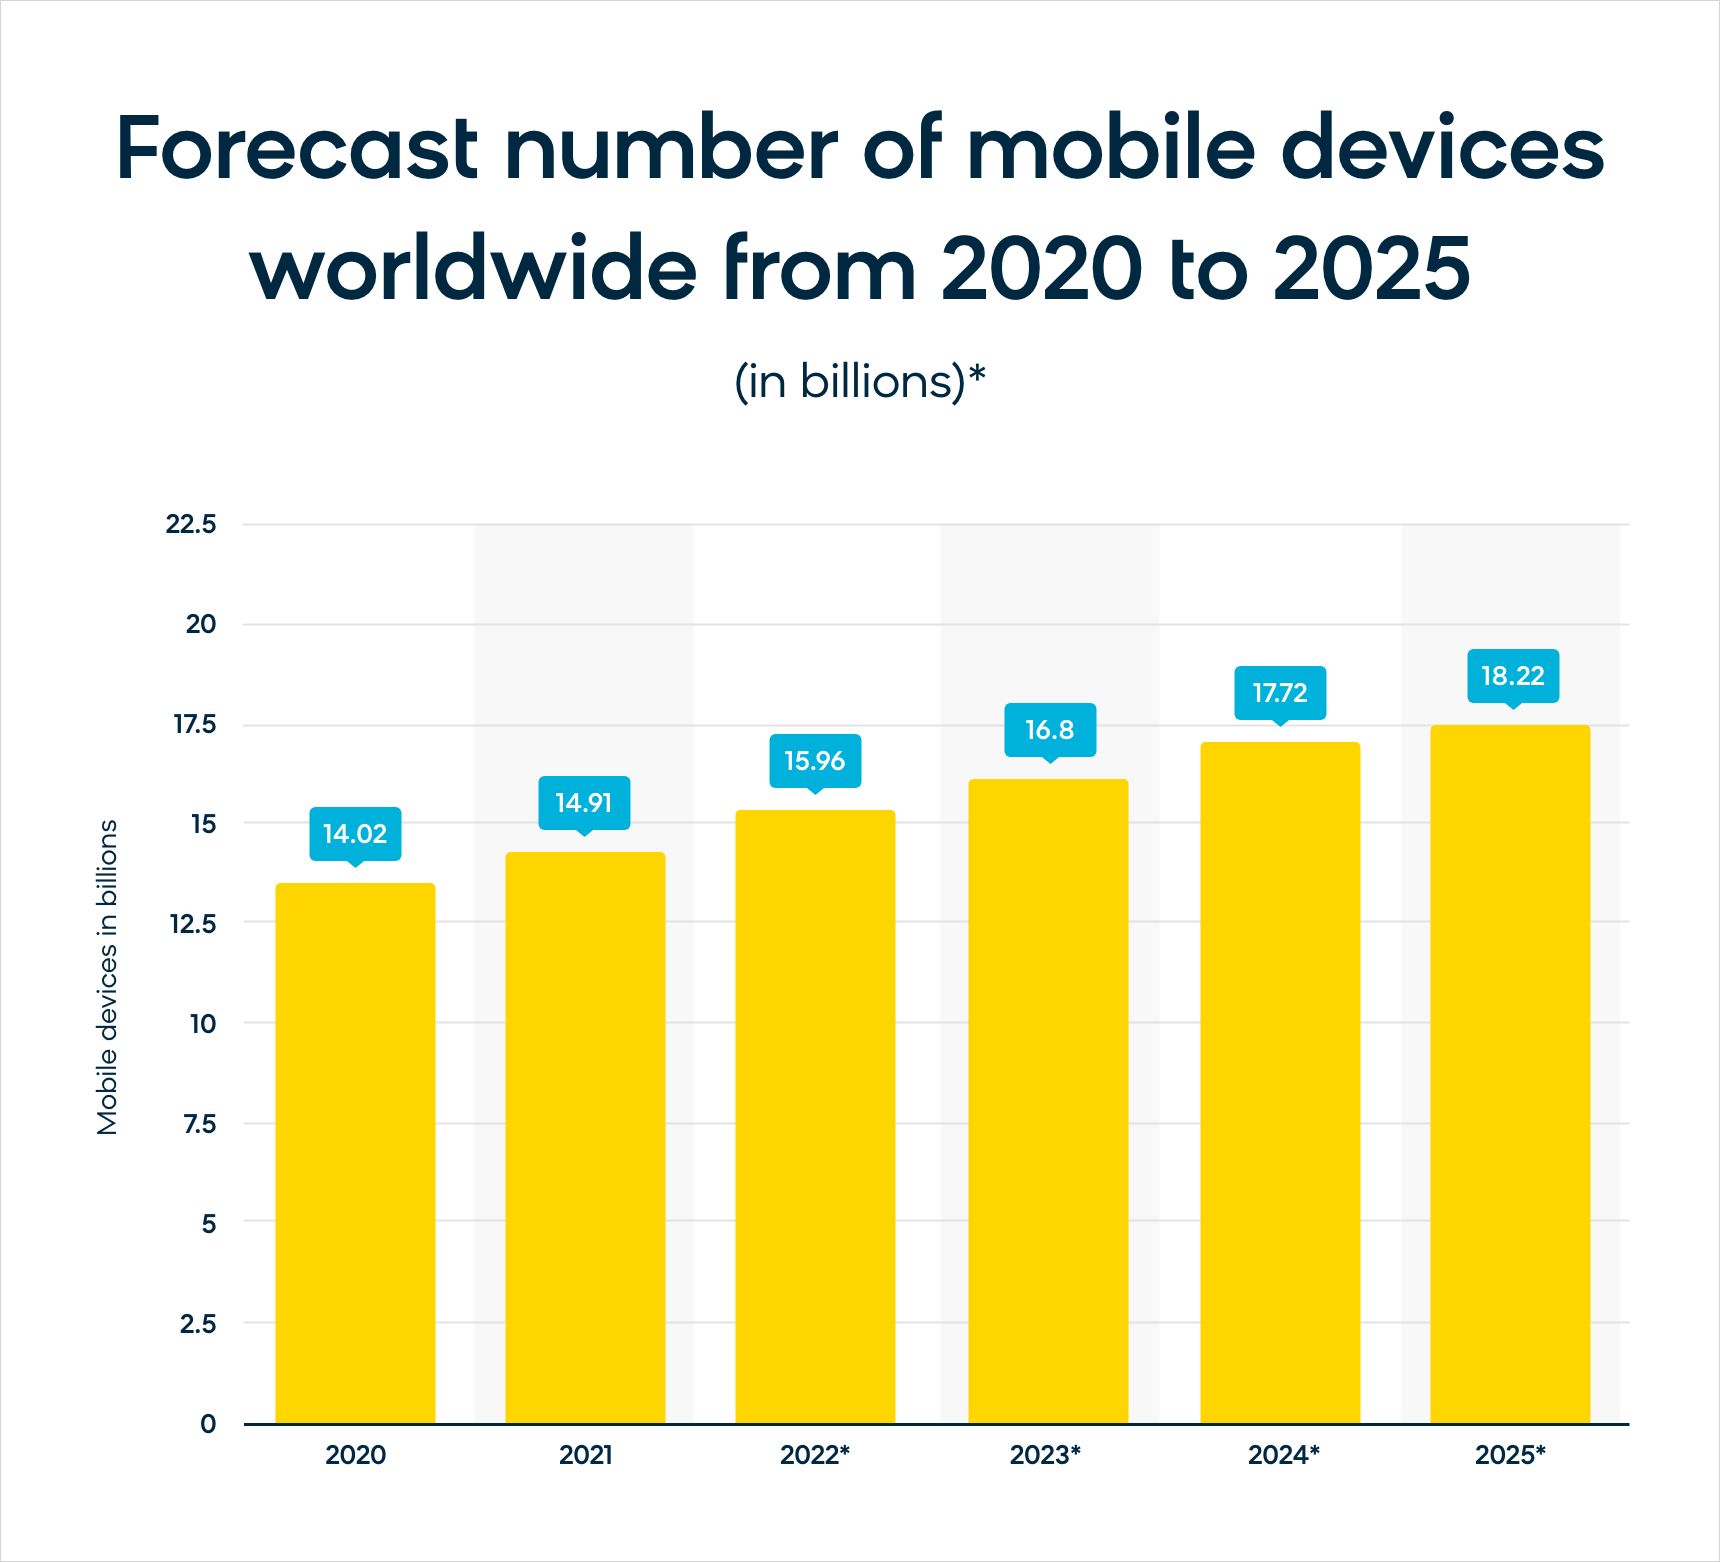 The forecasted number of mobile devices world wide, in billions, for the next 5 years